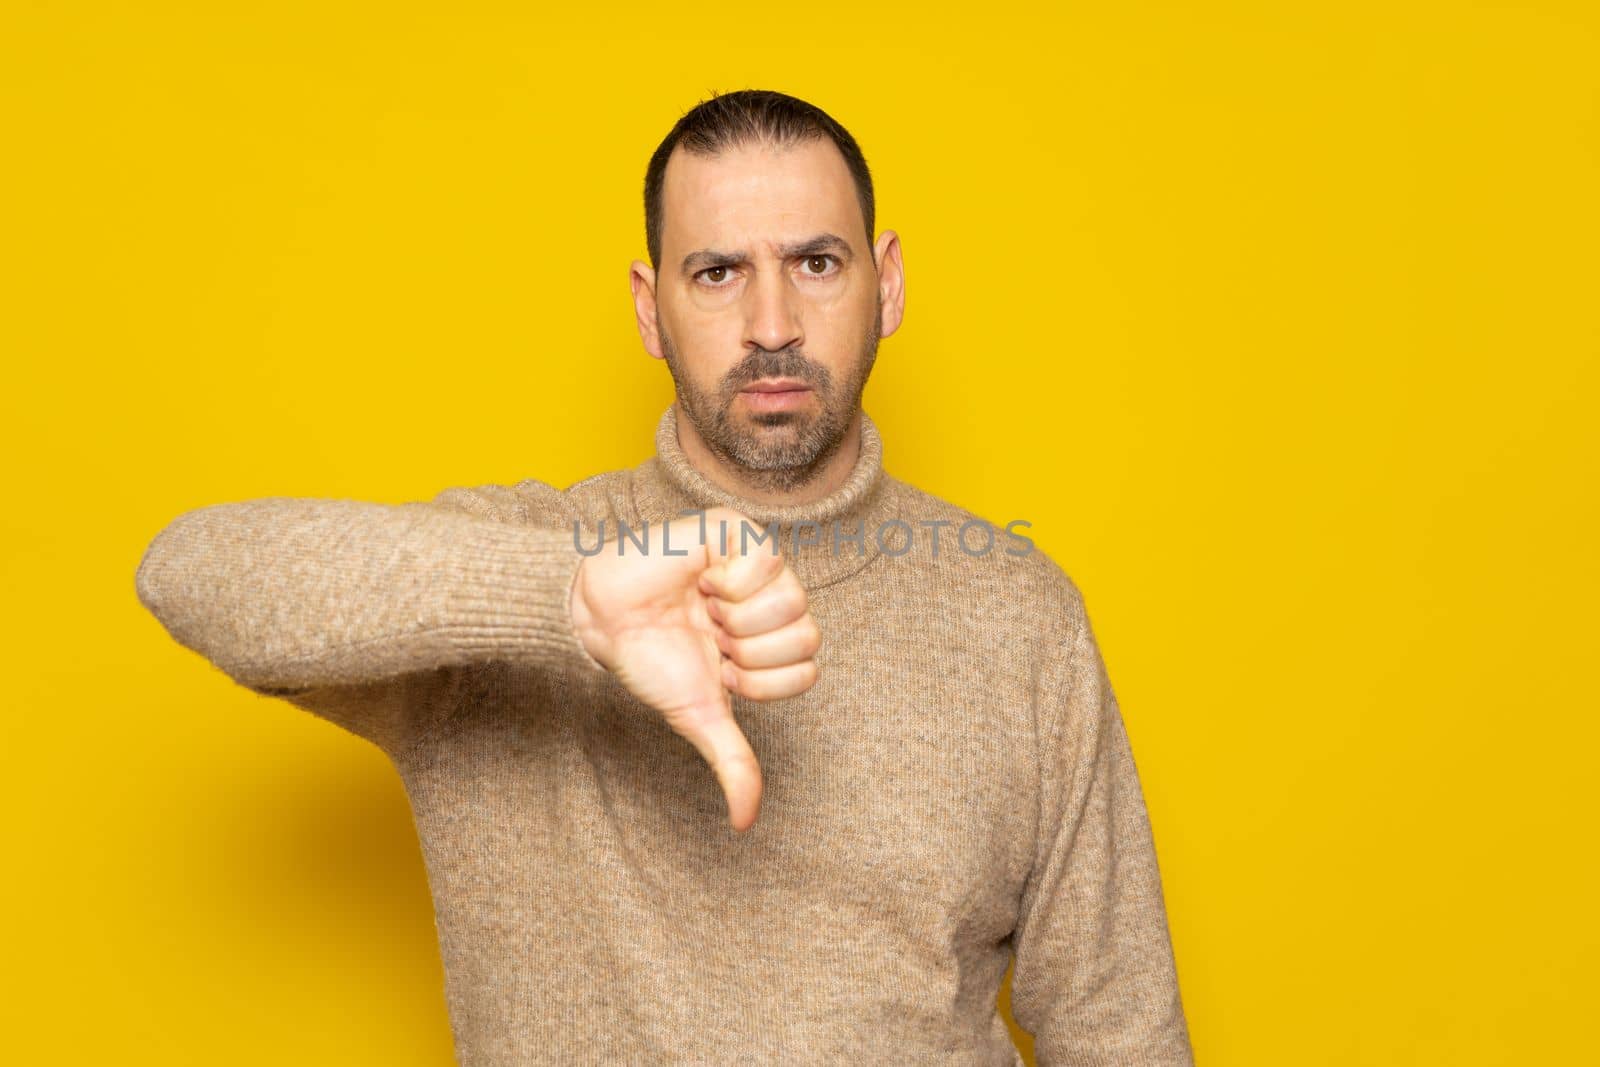 Hispanic man with a beard wearing a beige turtleneck posing with a serious expression over a yellow background has his thumbs down in disapproval